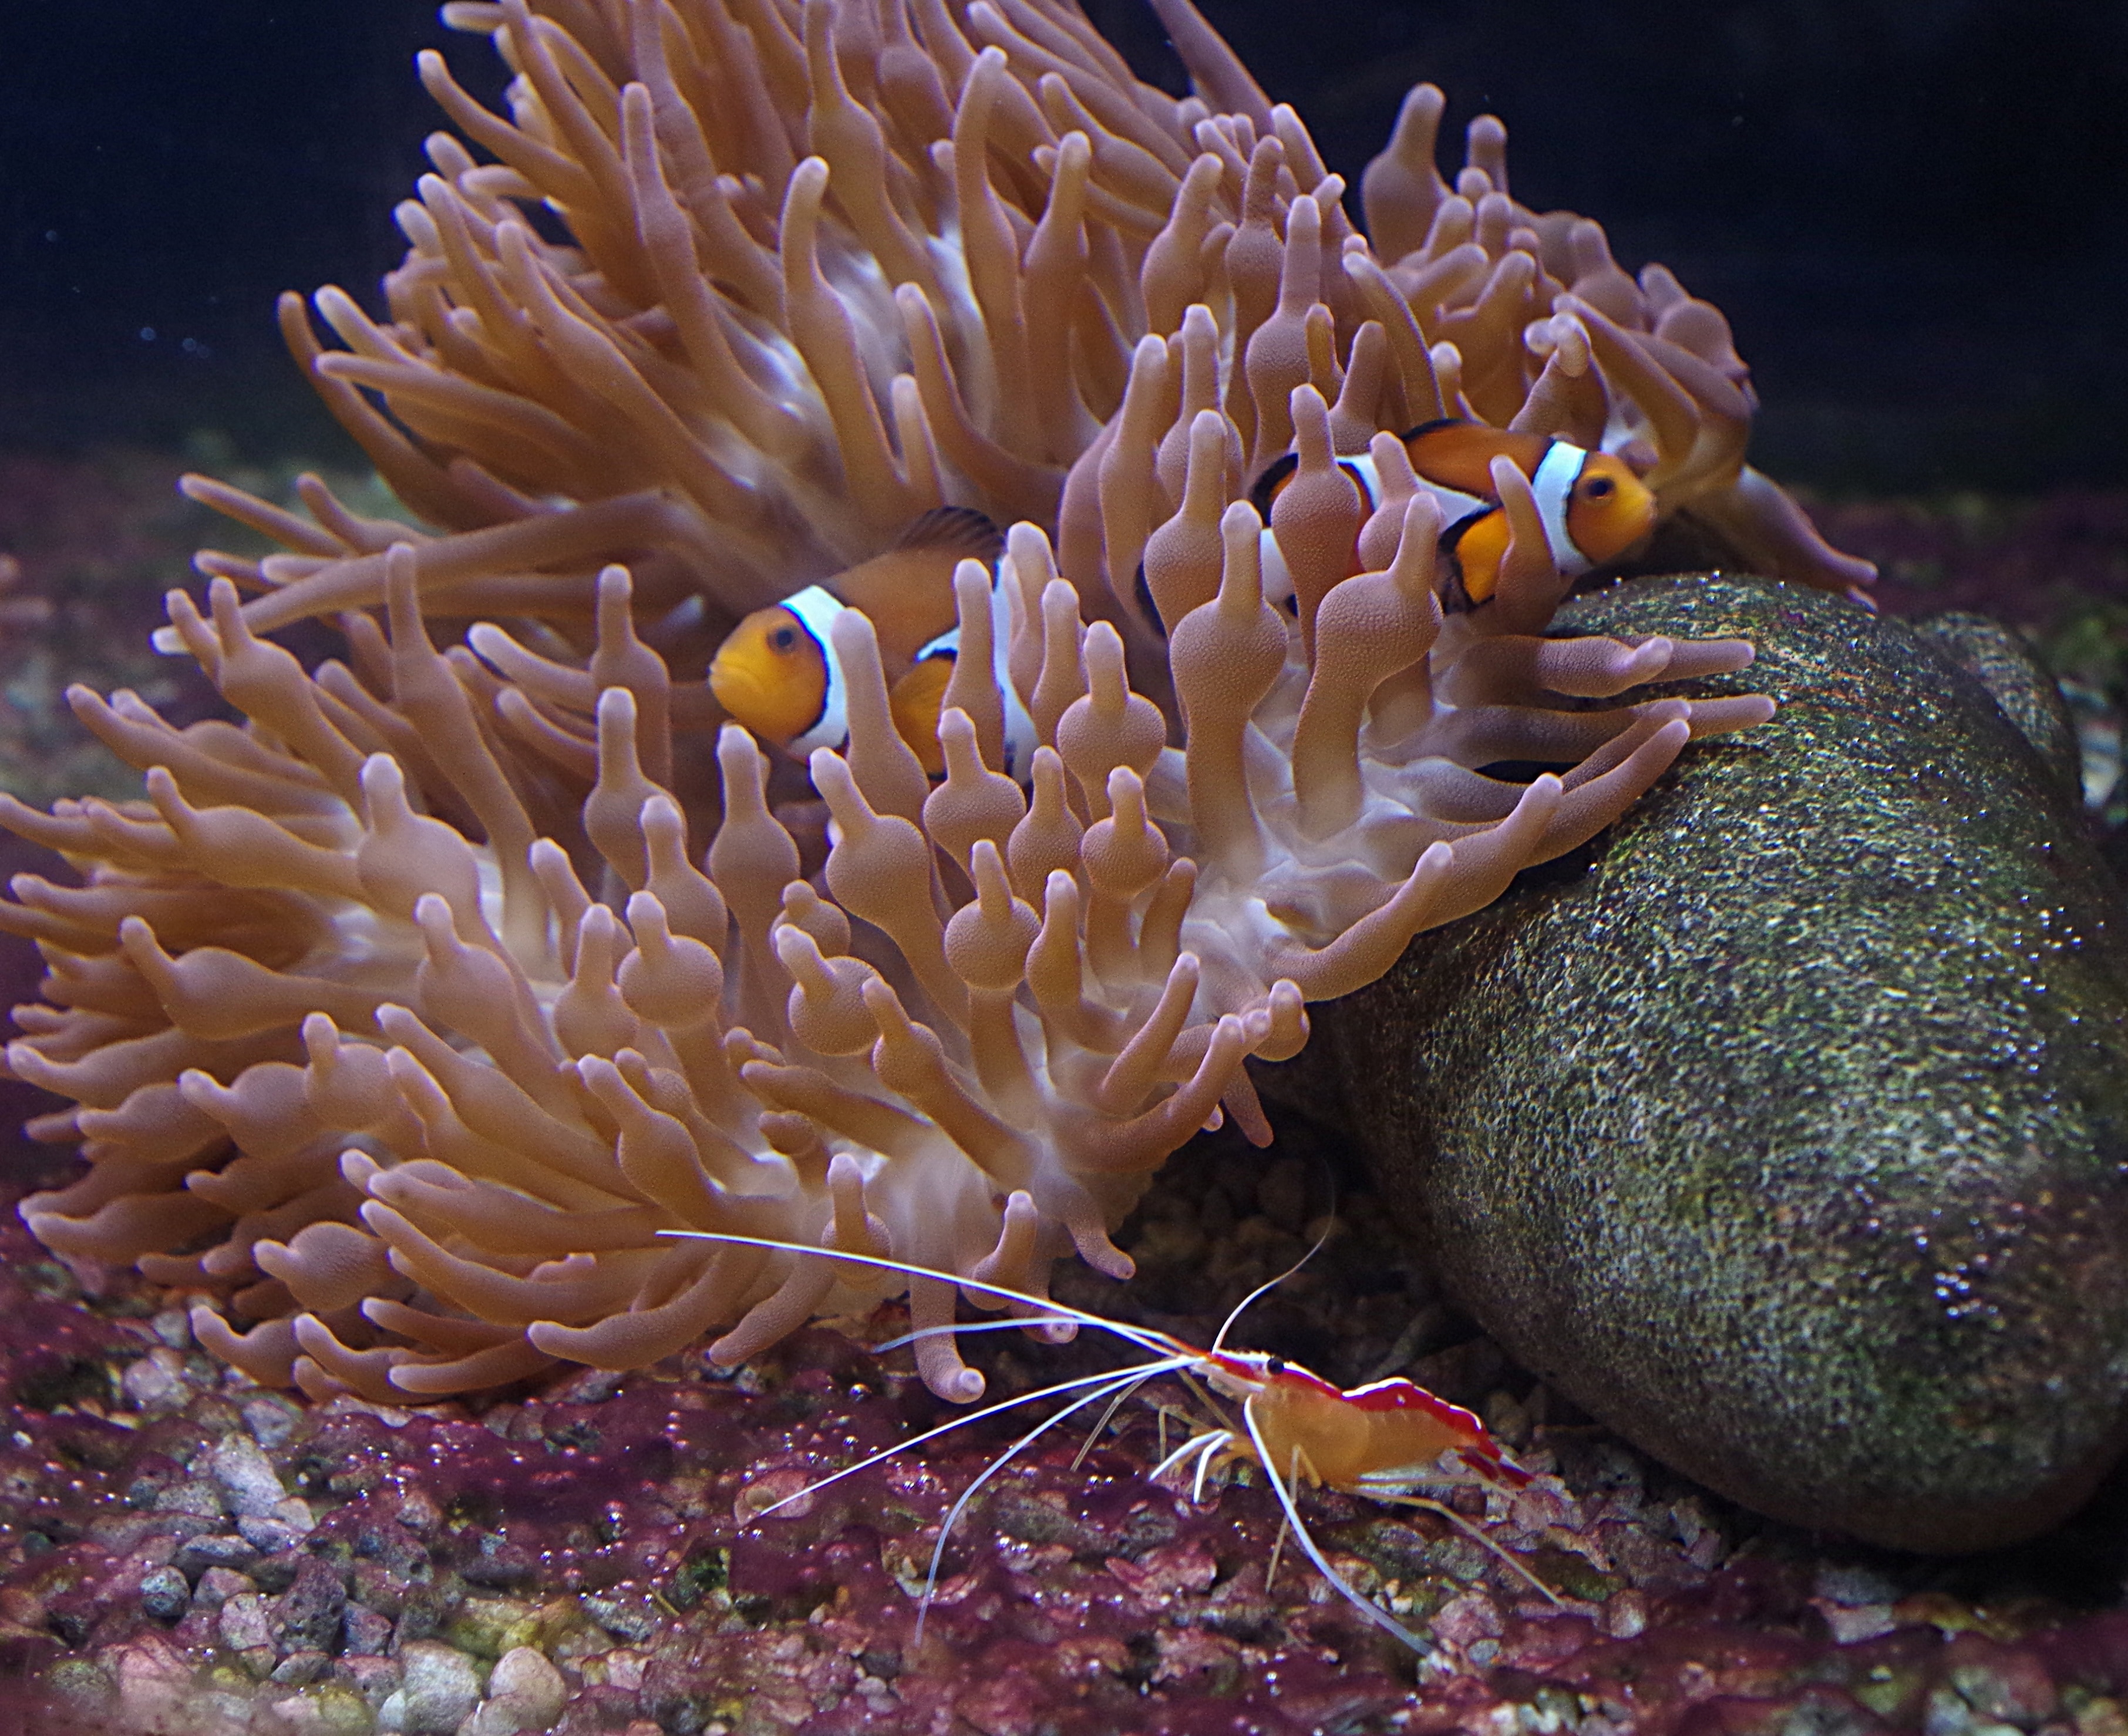 two clown fished in brown and white coral reef